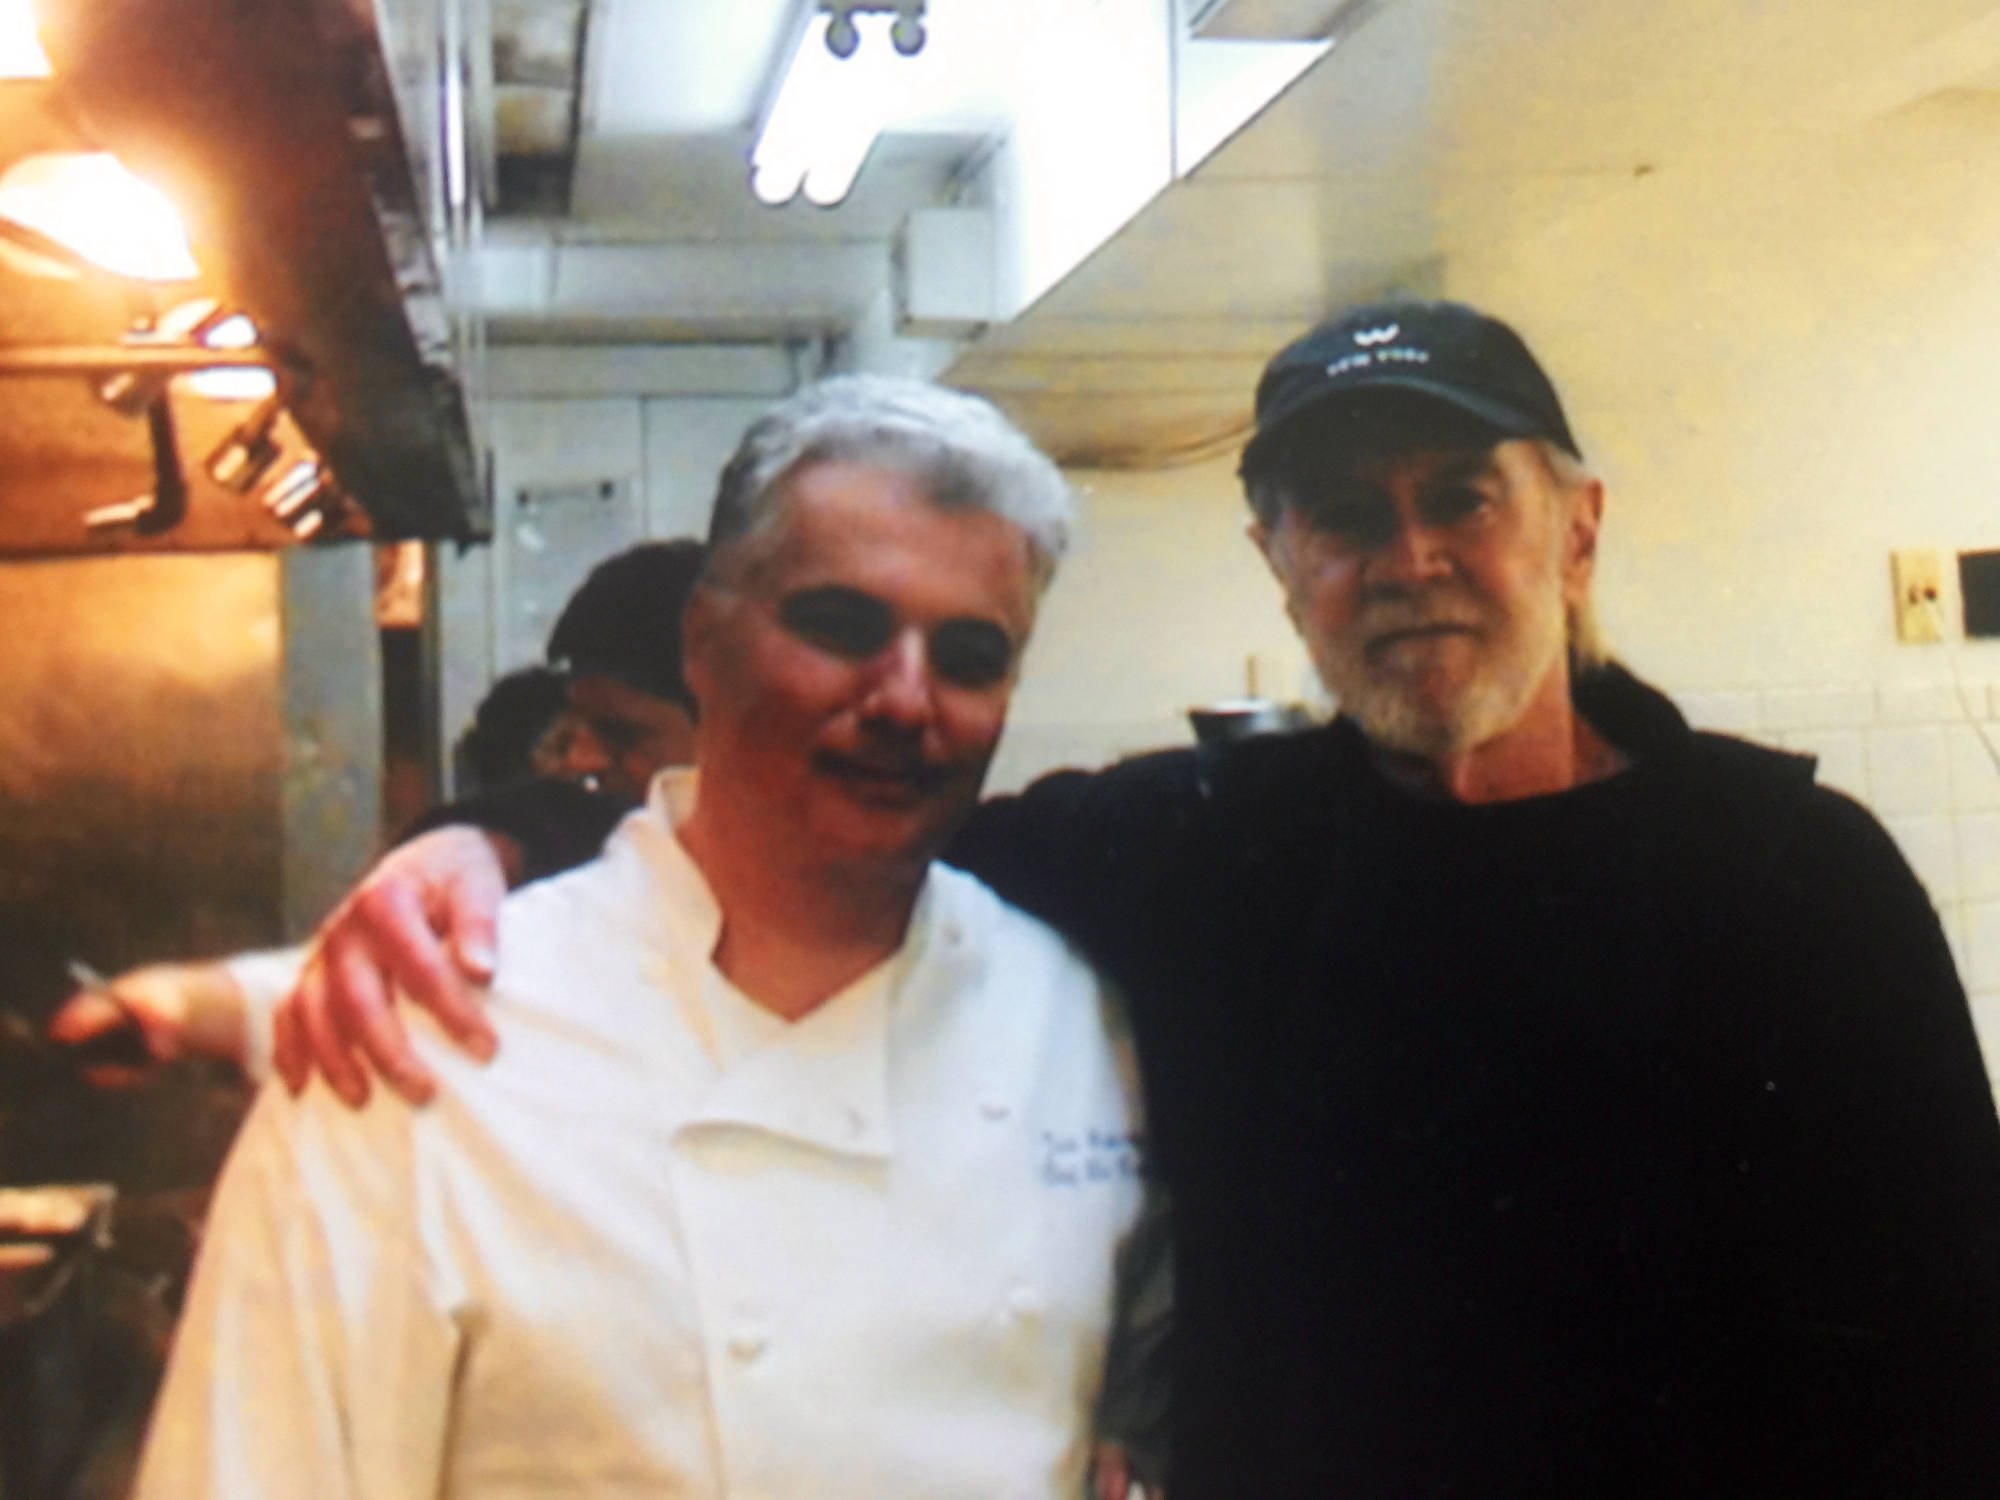 Chef with George Carlin!